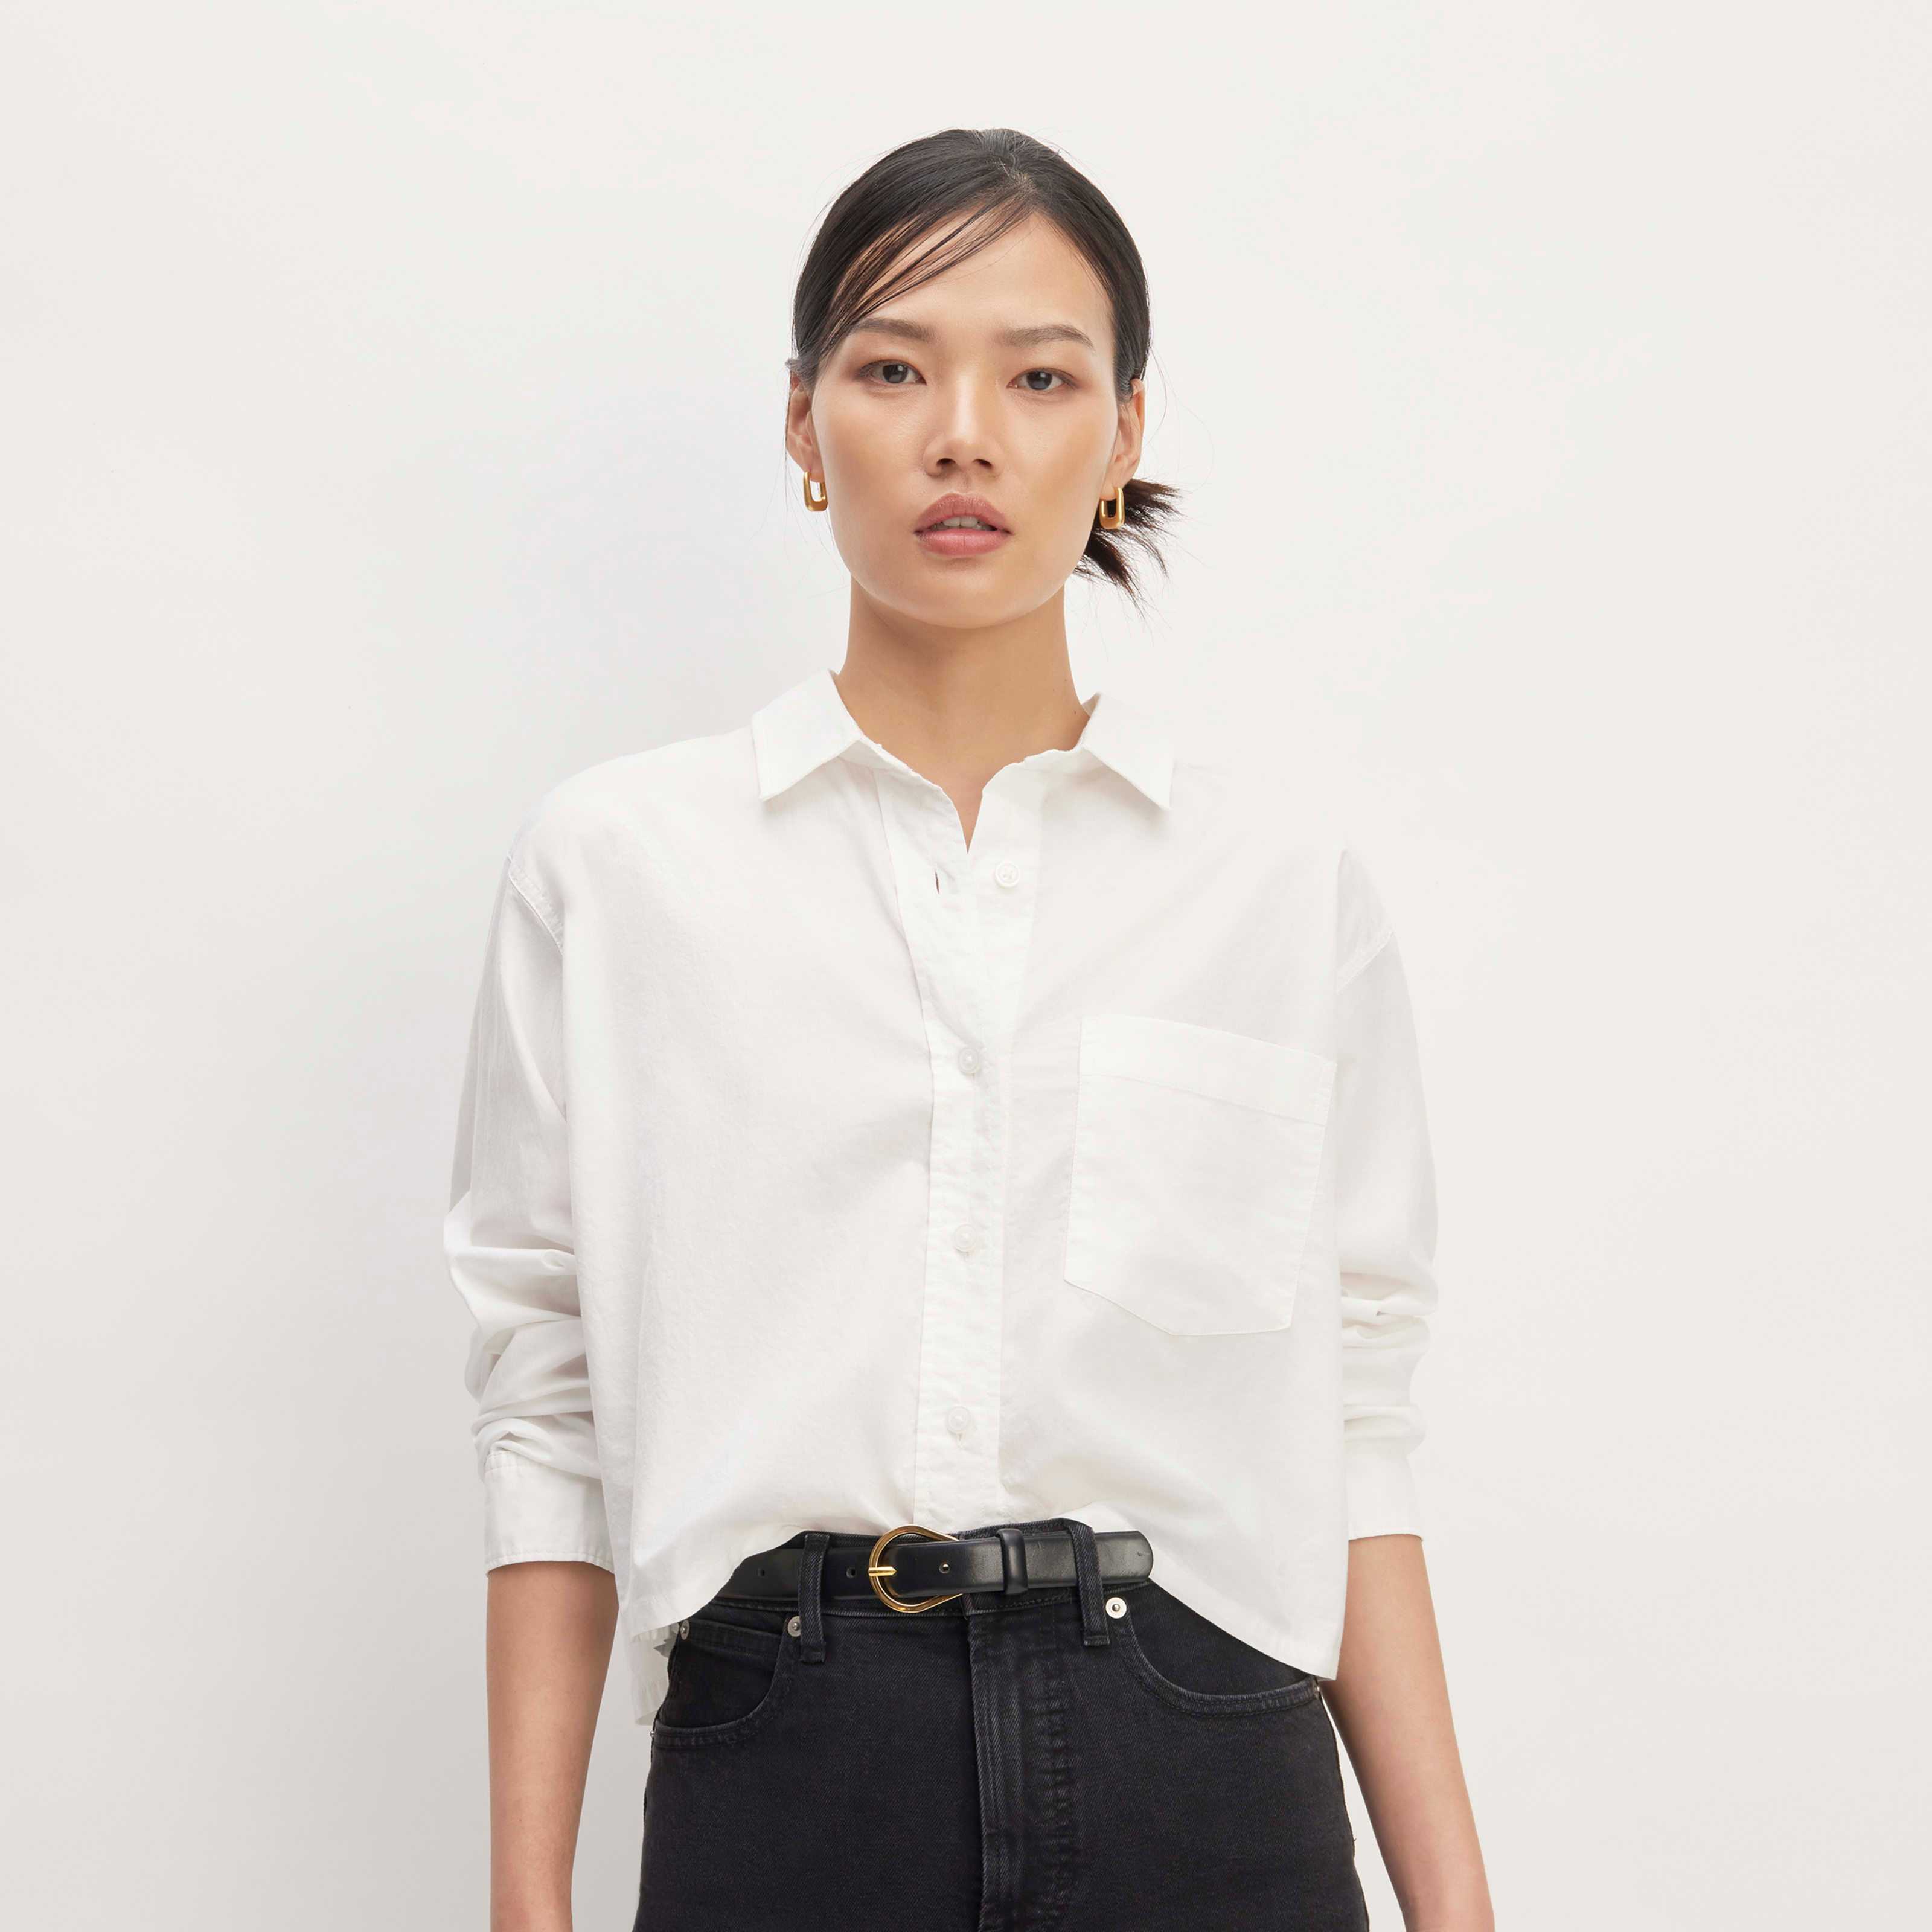 Women's Silky Cotton Way-Short Shirt by Everlane in White, Size M